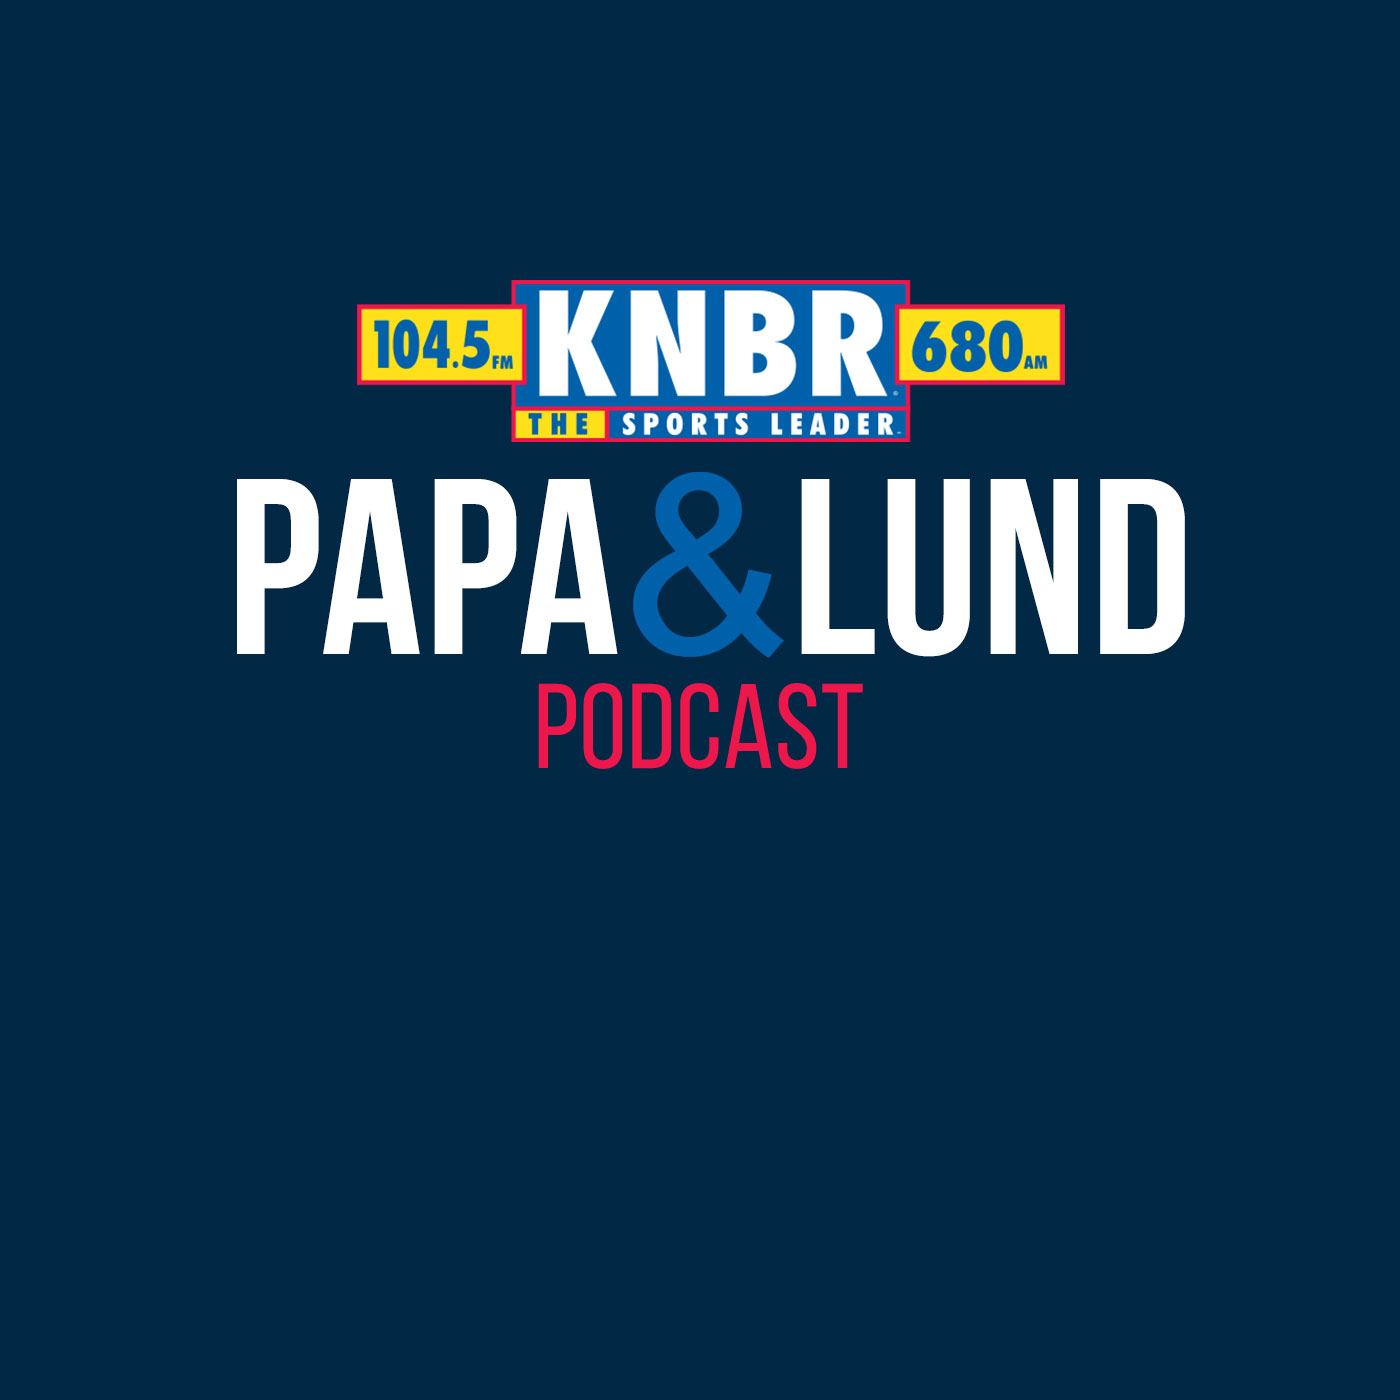 4-18 Papa & Lund Show - Hour 3- Papa & Lund react to Mike Dunleavy's press conference and what the Warriors should do in order to improve this roster + Interview with Sal Paolantonio to discuss the NFL Draft